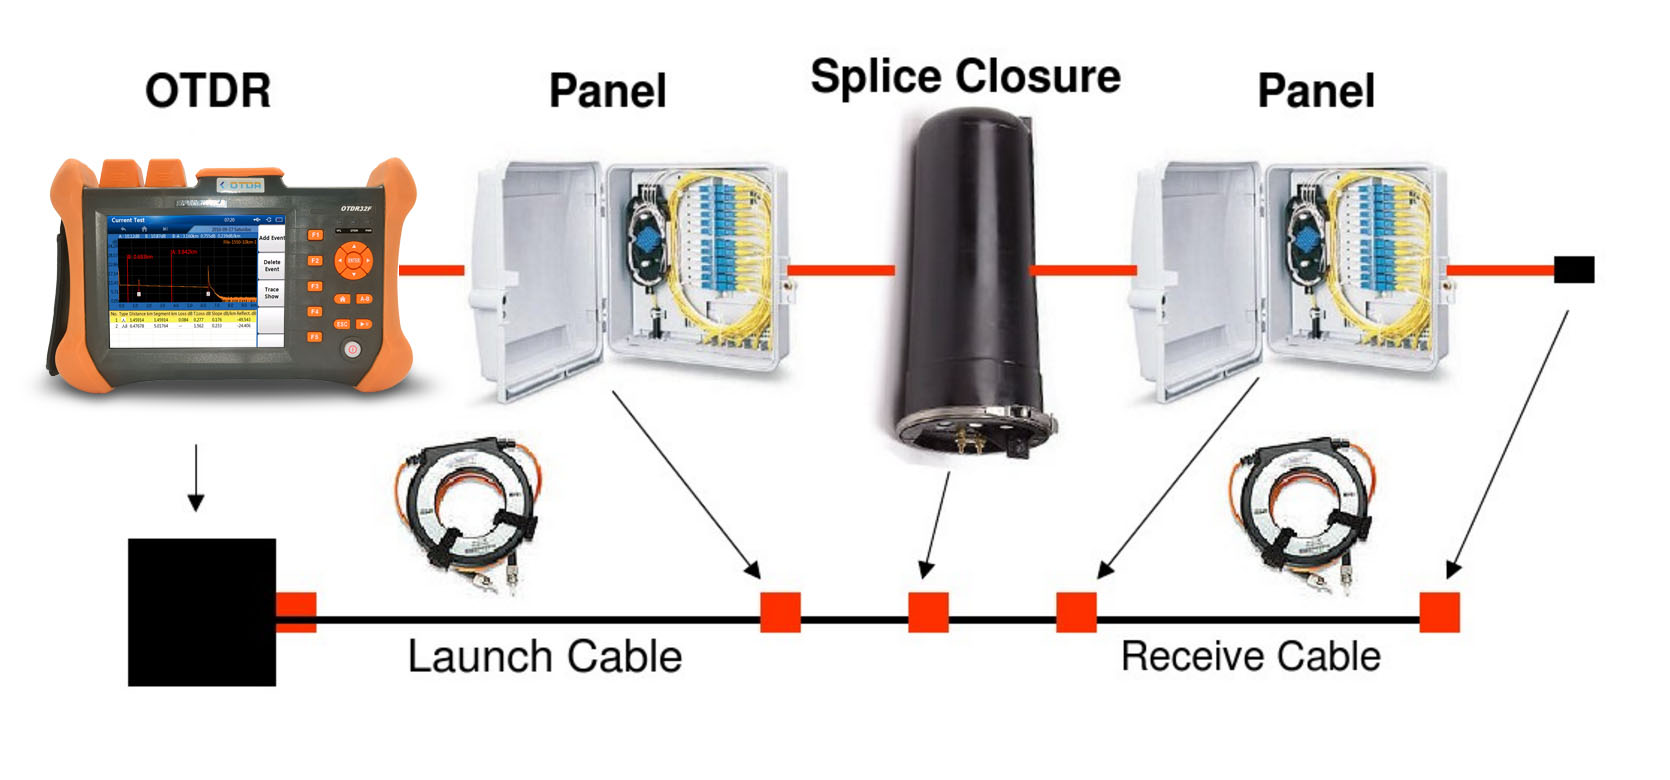  Use of a launch cable